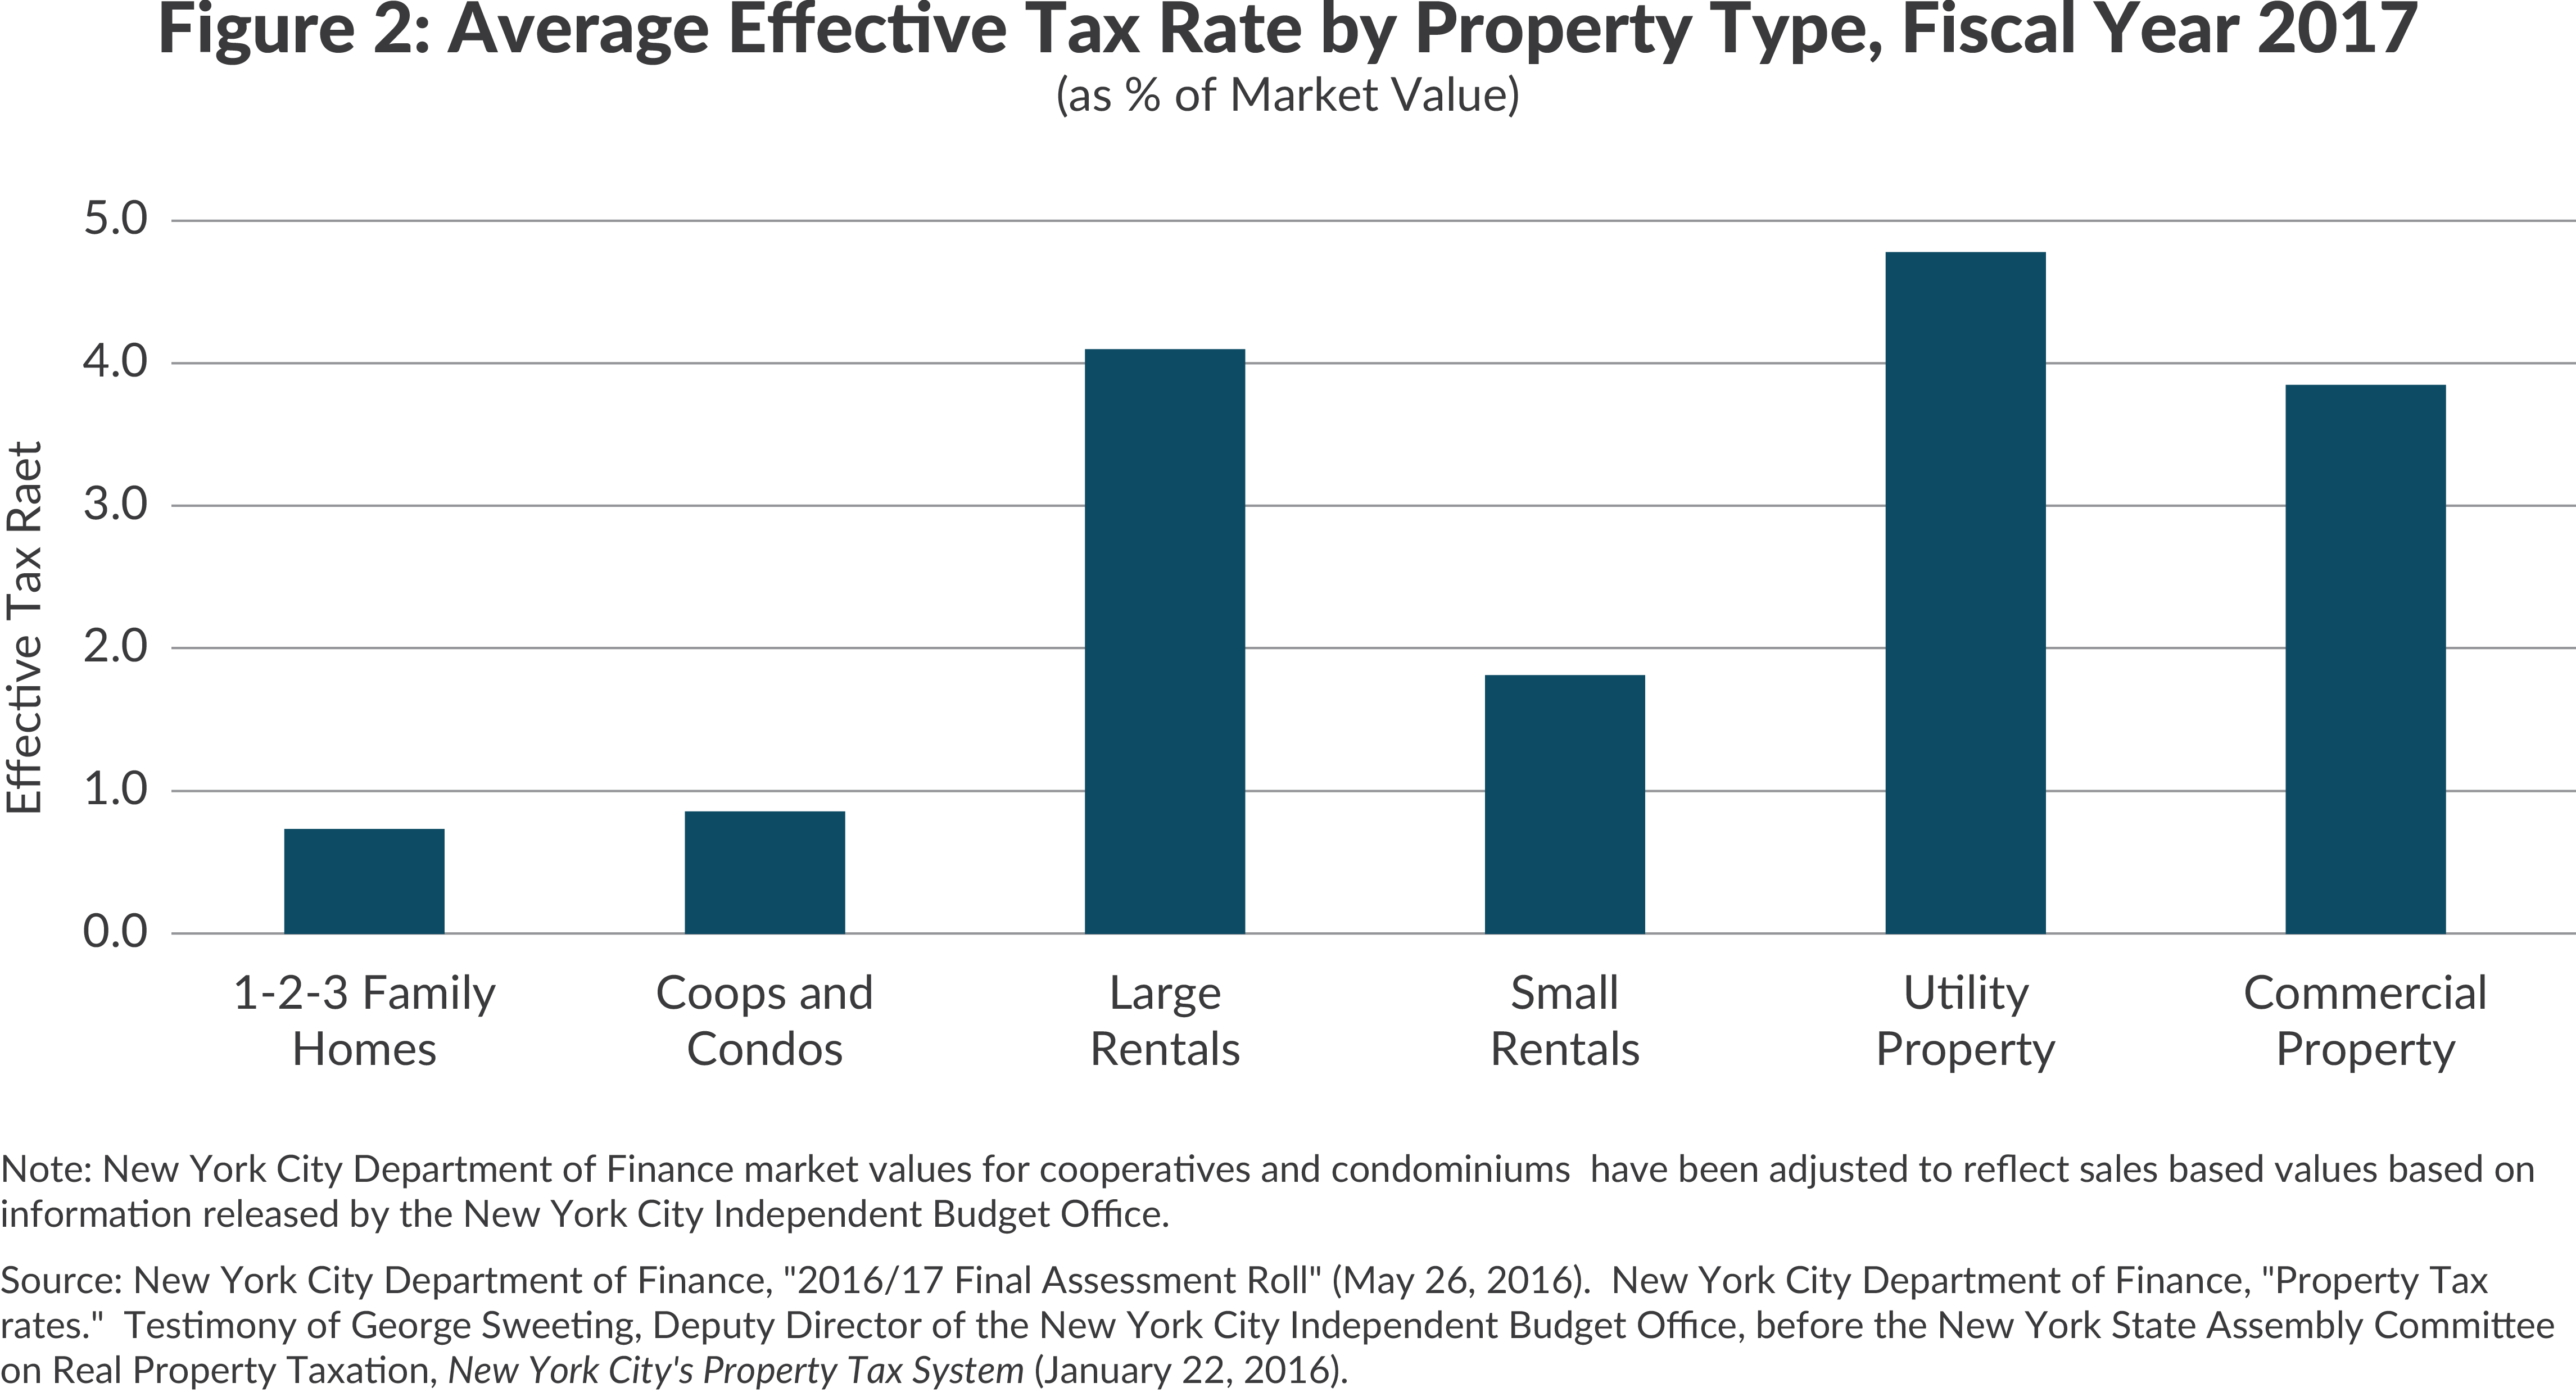 difference in effective tax rates among types of property